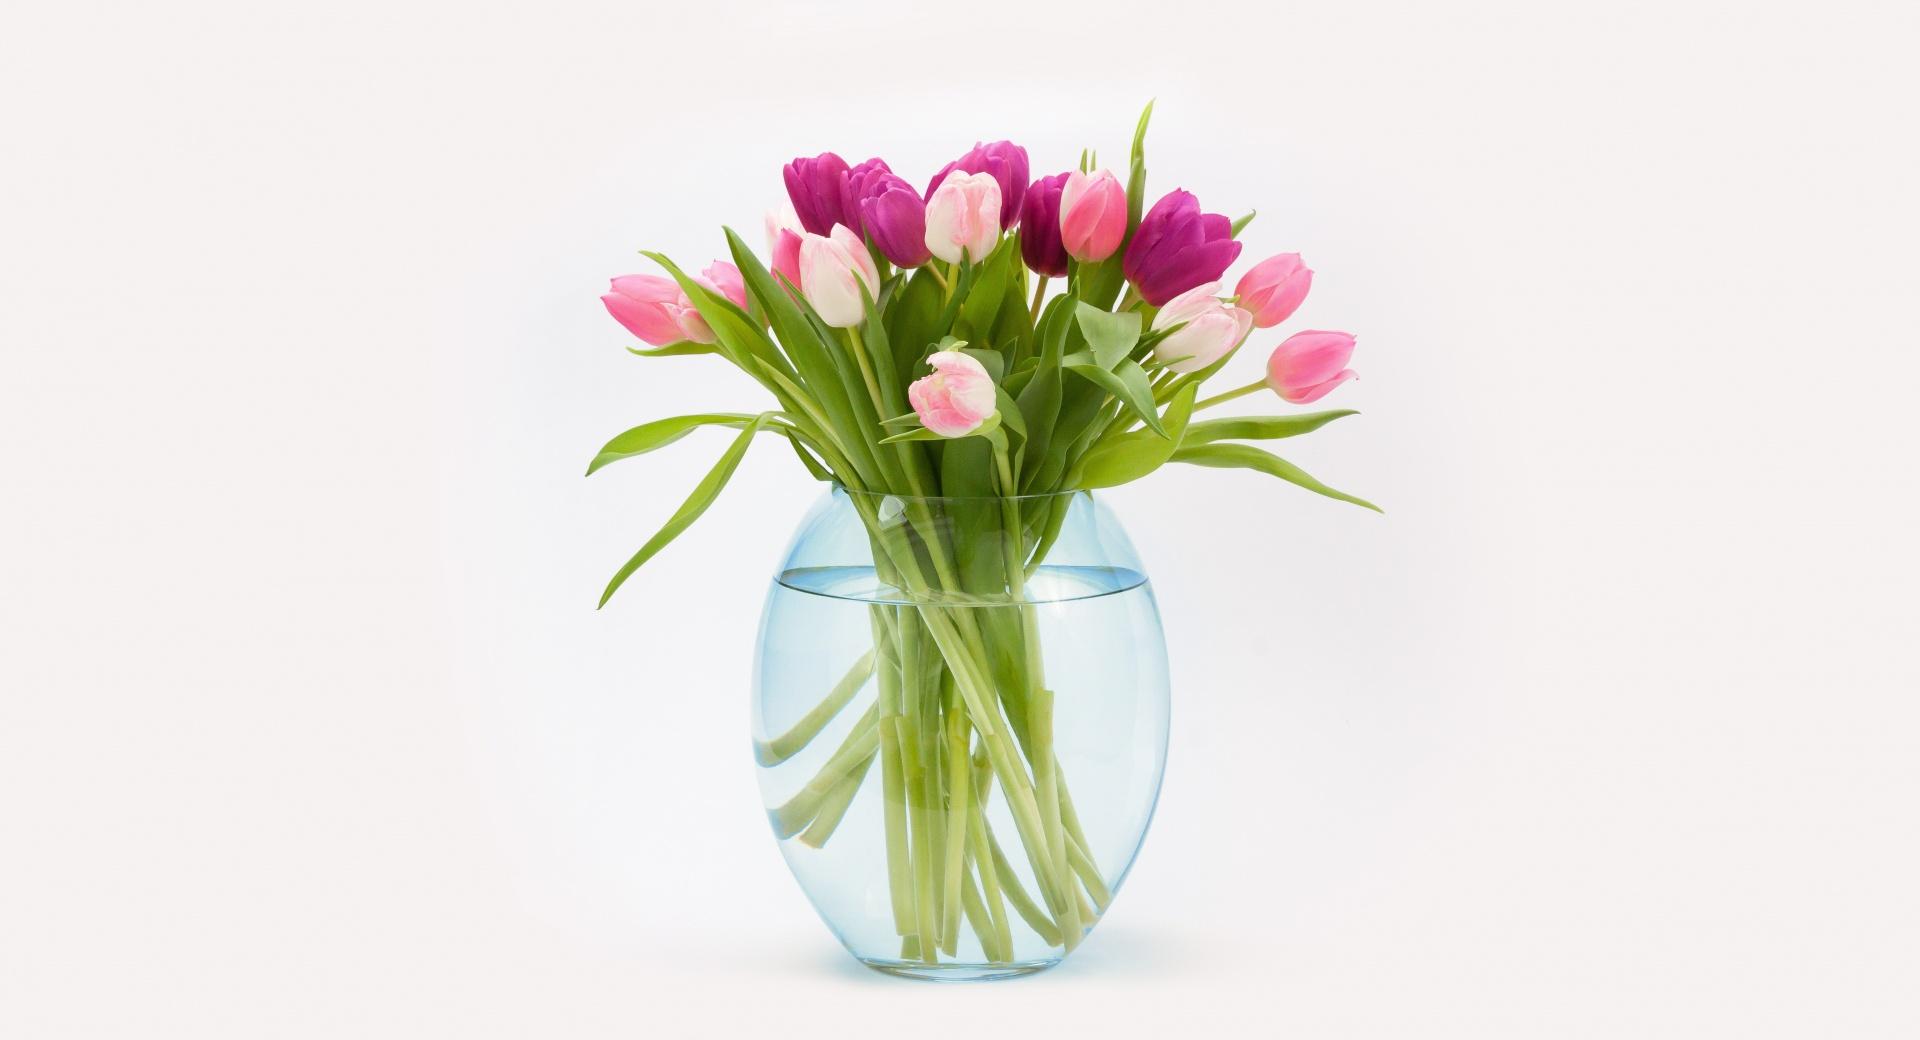 Easter Tulips Flowers Bouquet in a Vase wallpapers HD quality